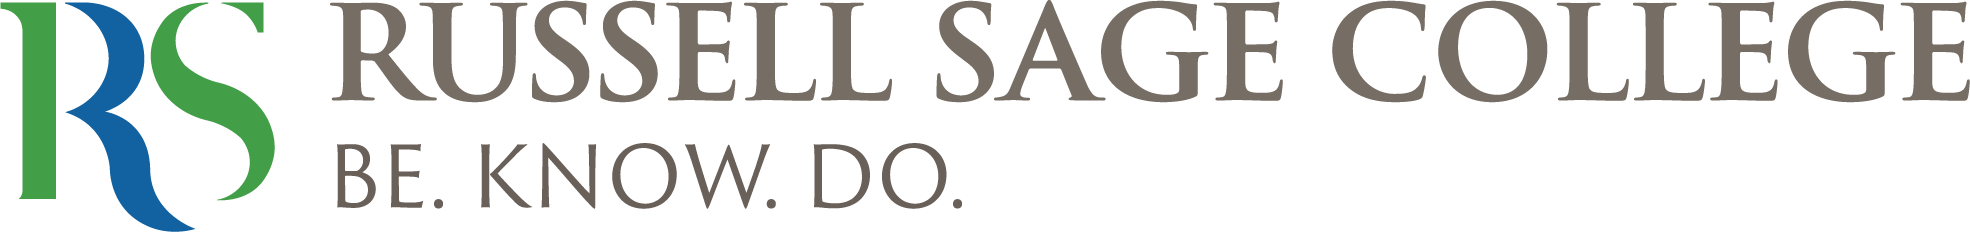 Russell Sage College logo